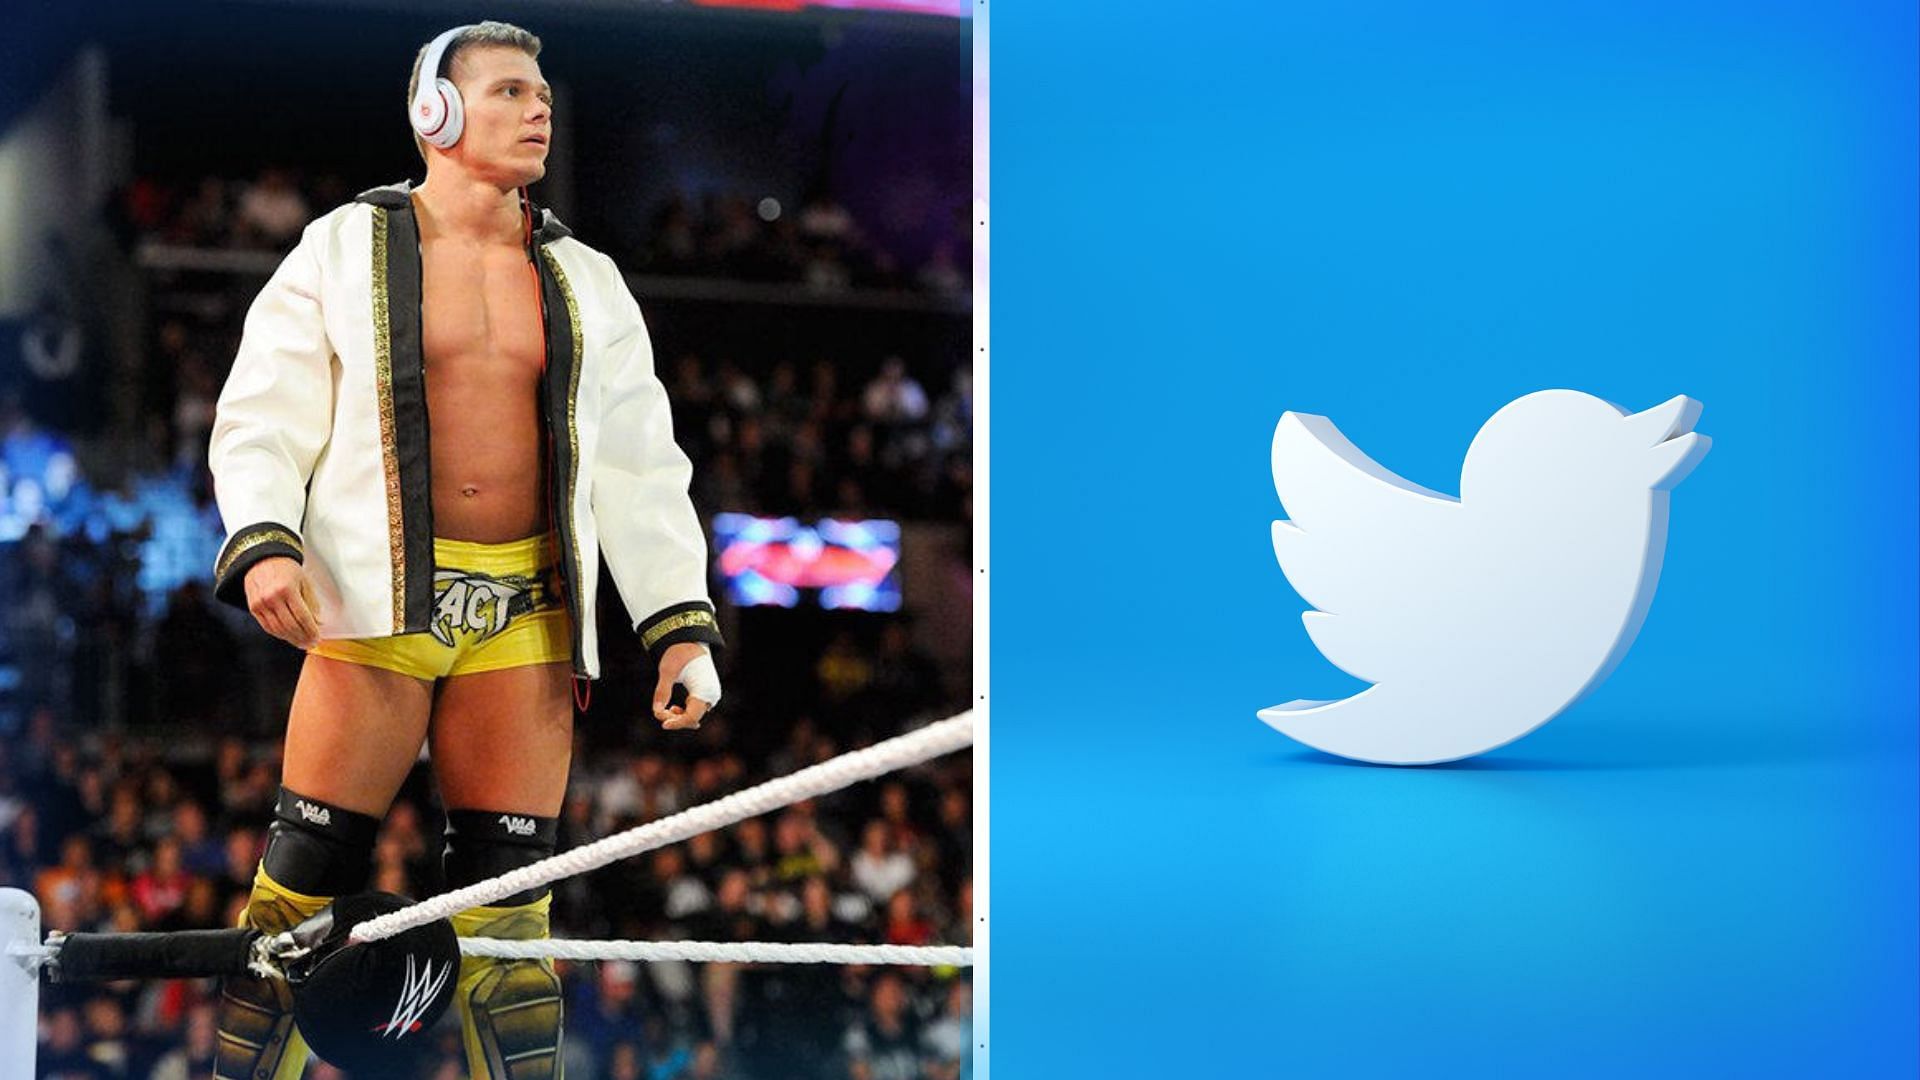 Tyson Kidd reacts to a classic wrestling match